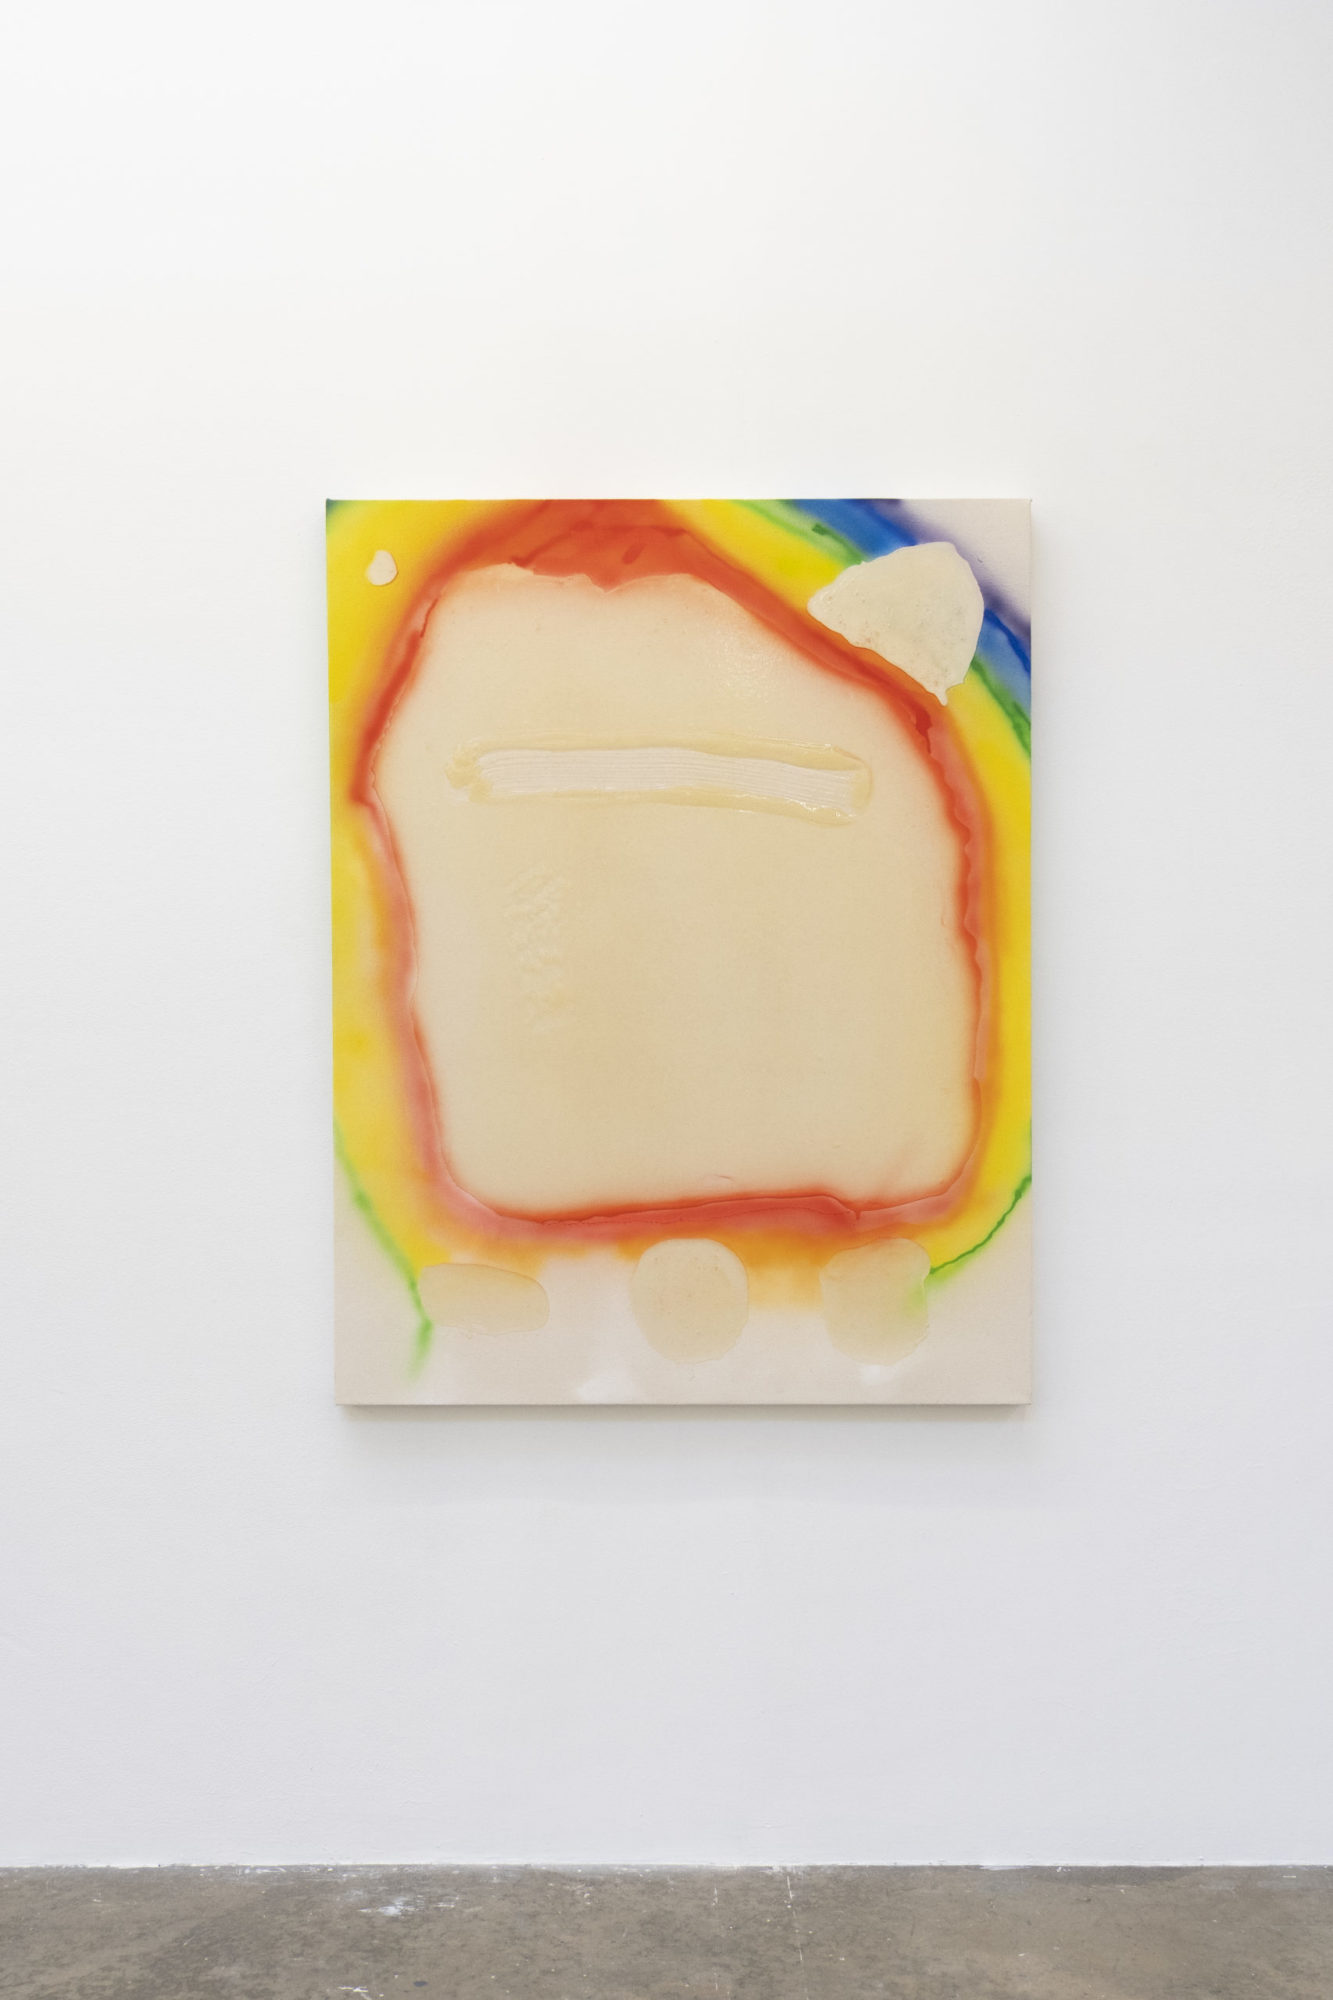 An abstract, acrylic painting, which incorporates beige and primary colors, hangs from a white wall